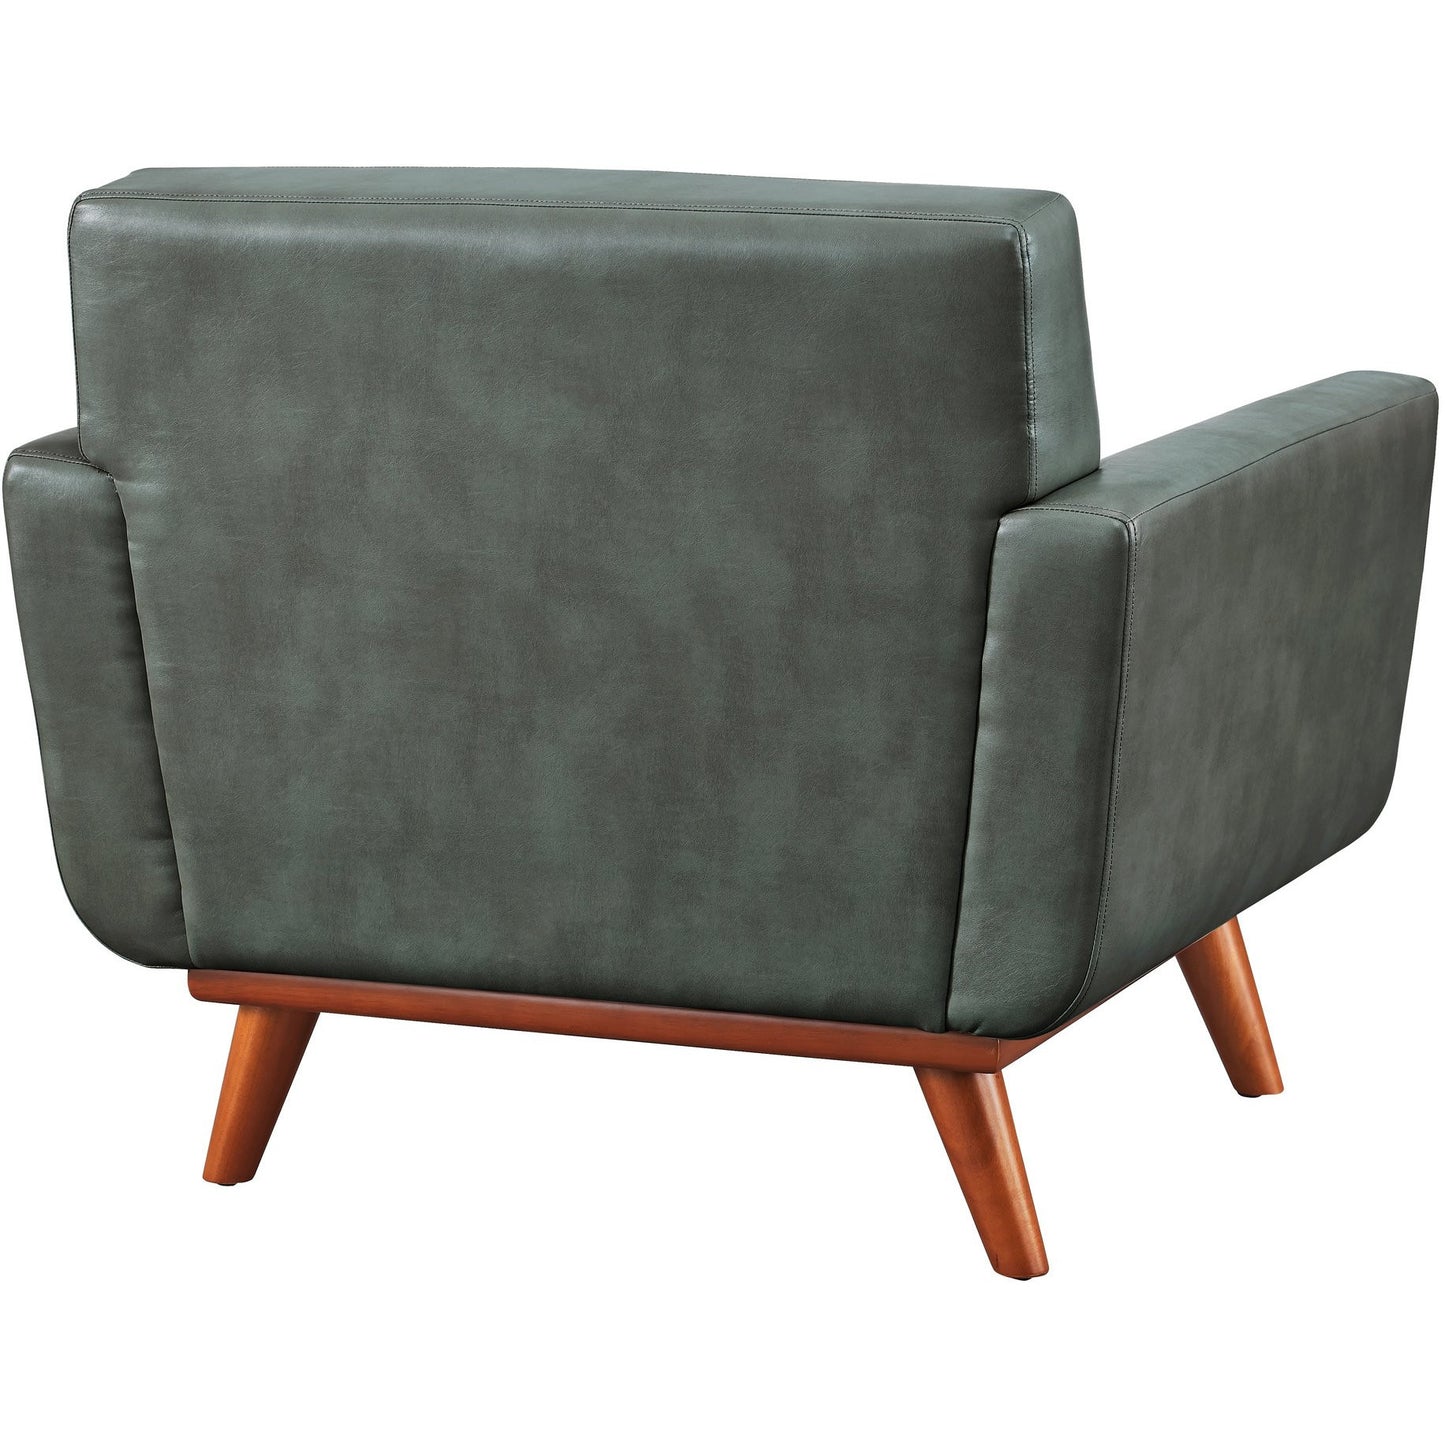 Queen Mary Smoke Grey Leather Armchair - living-essentials